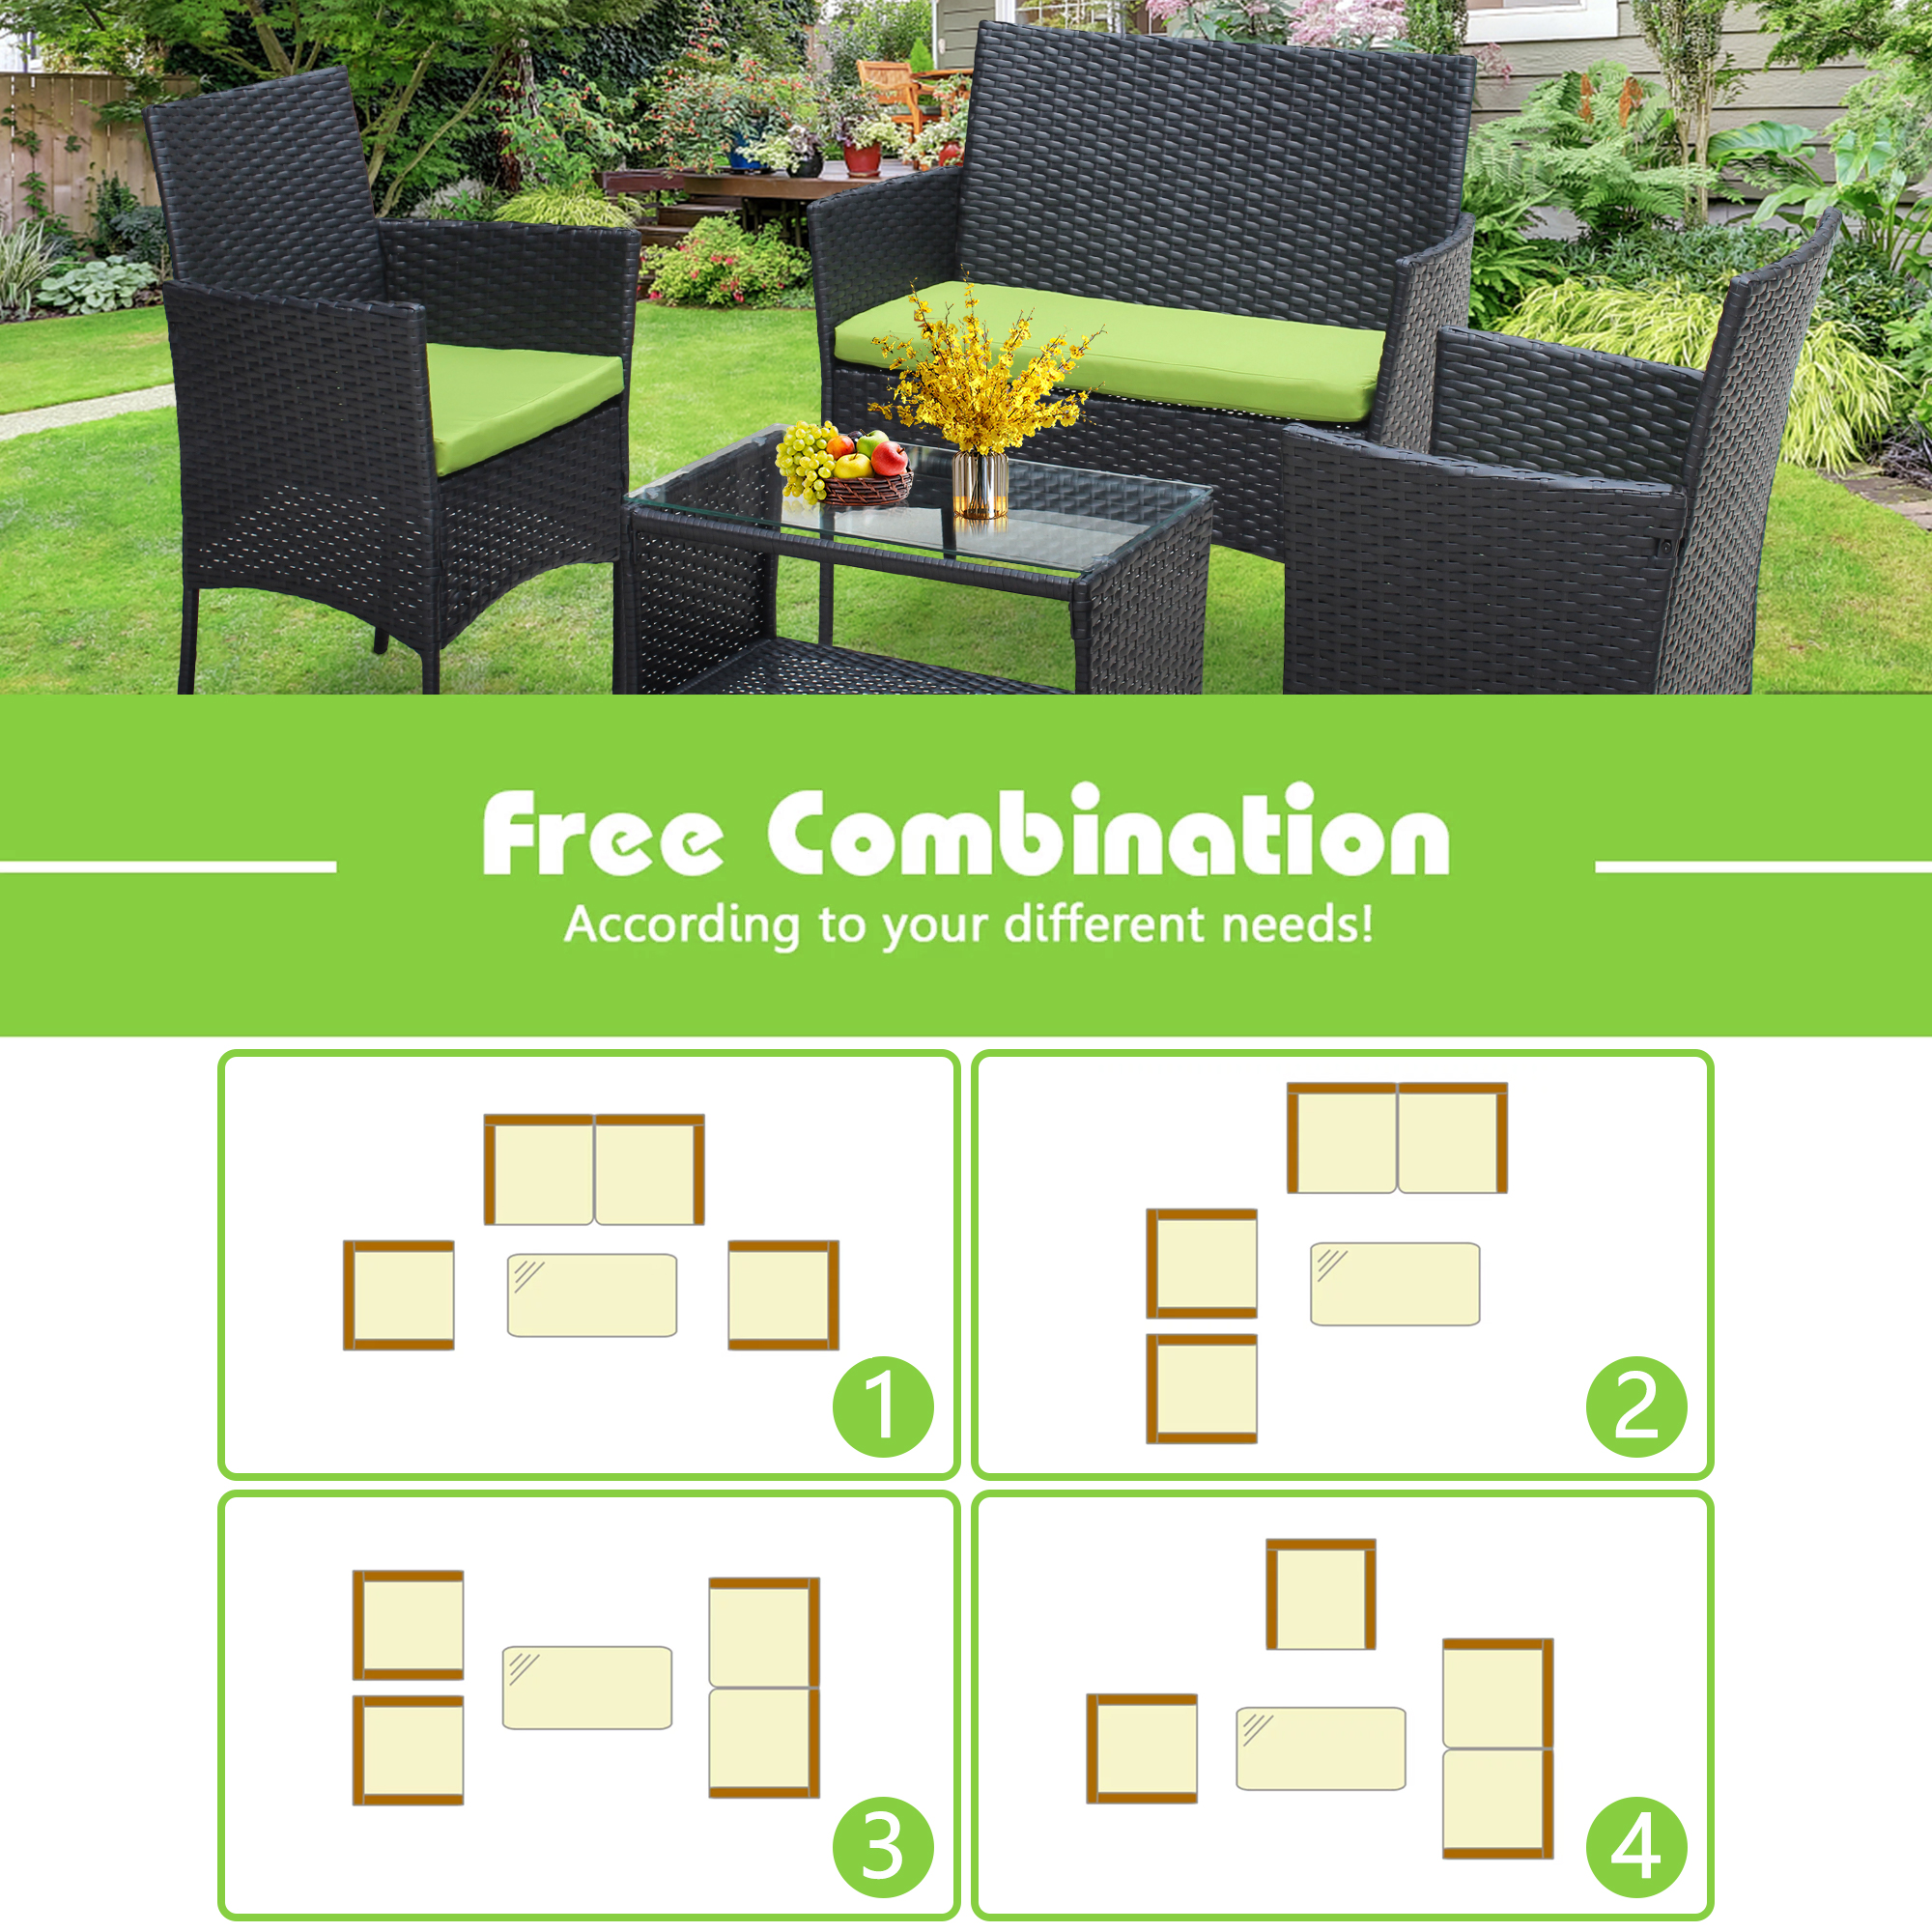 4-Piece Patio Outdoor Rattan Chair, Bistro Table Conversation Set, with Soft Cushion & Glass Table, Patio Rattan Conversation Furniture Set, Leisure Furniture Set for Garden Backyard Balcony, T194 - image 5 of 8